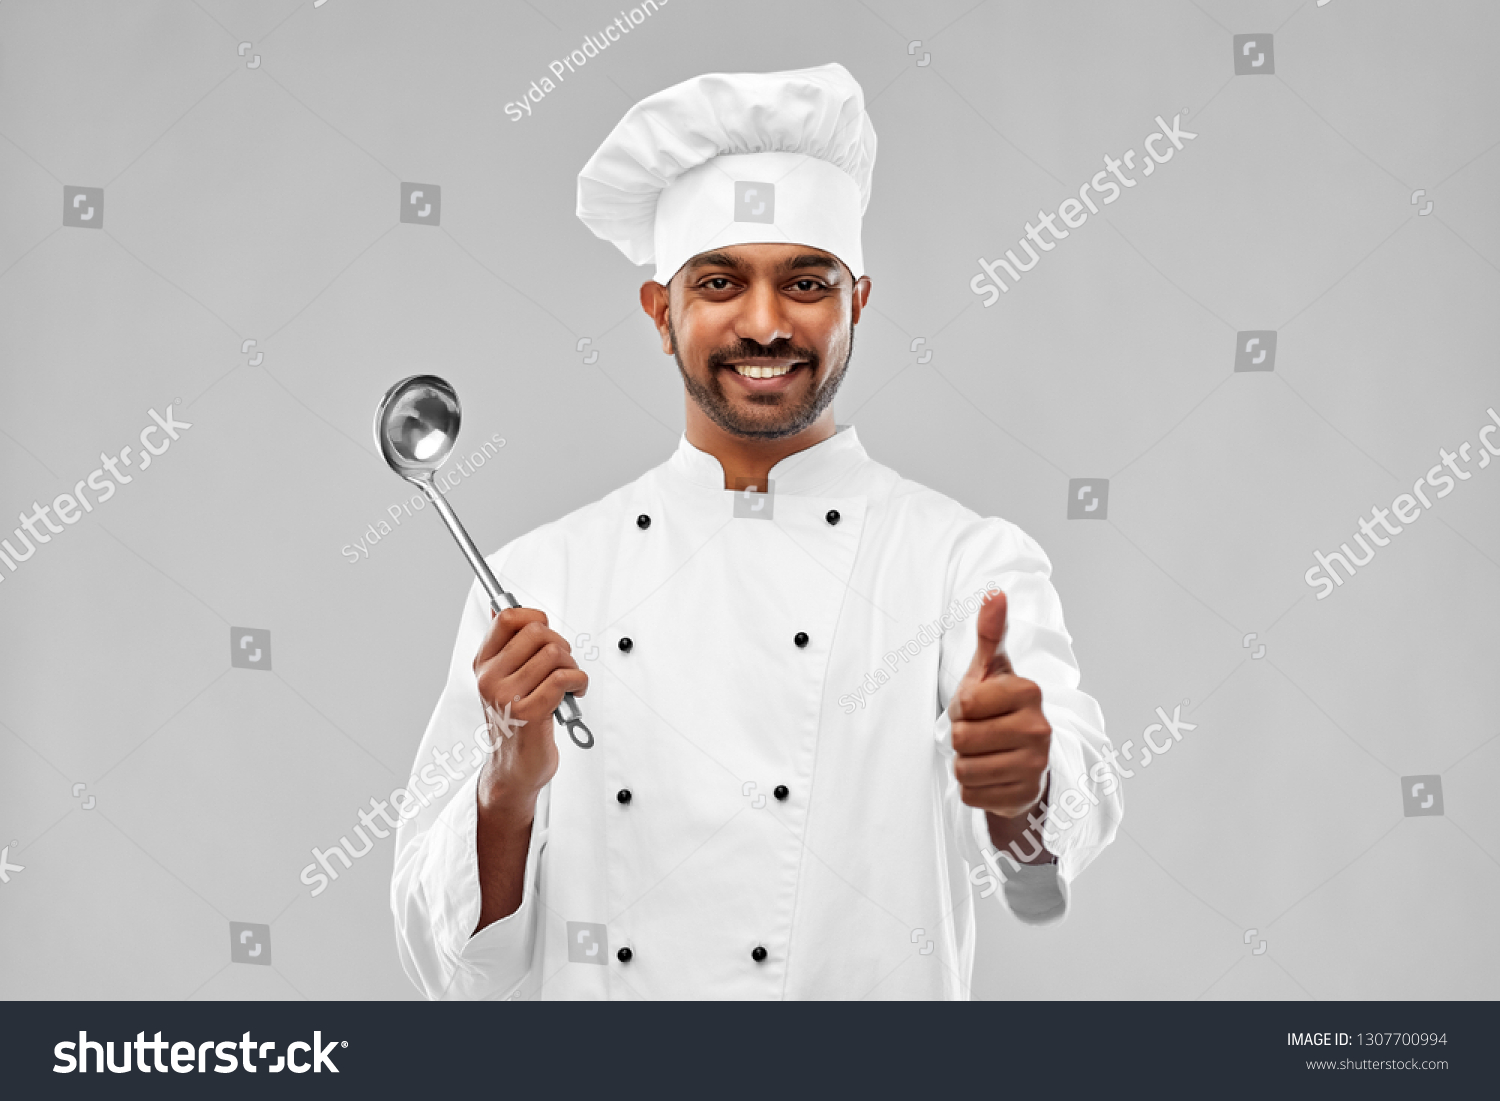 cooking, profession and people concept - happy male indian chef in toque with ladle showing thumbs up over grey background #1307700994